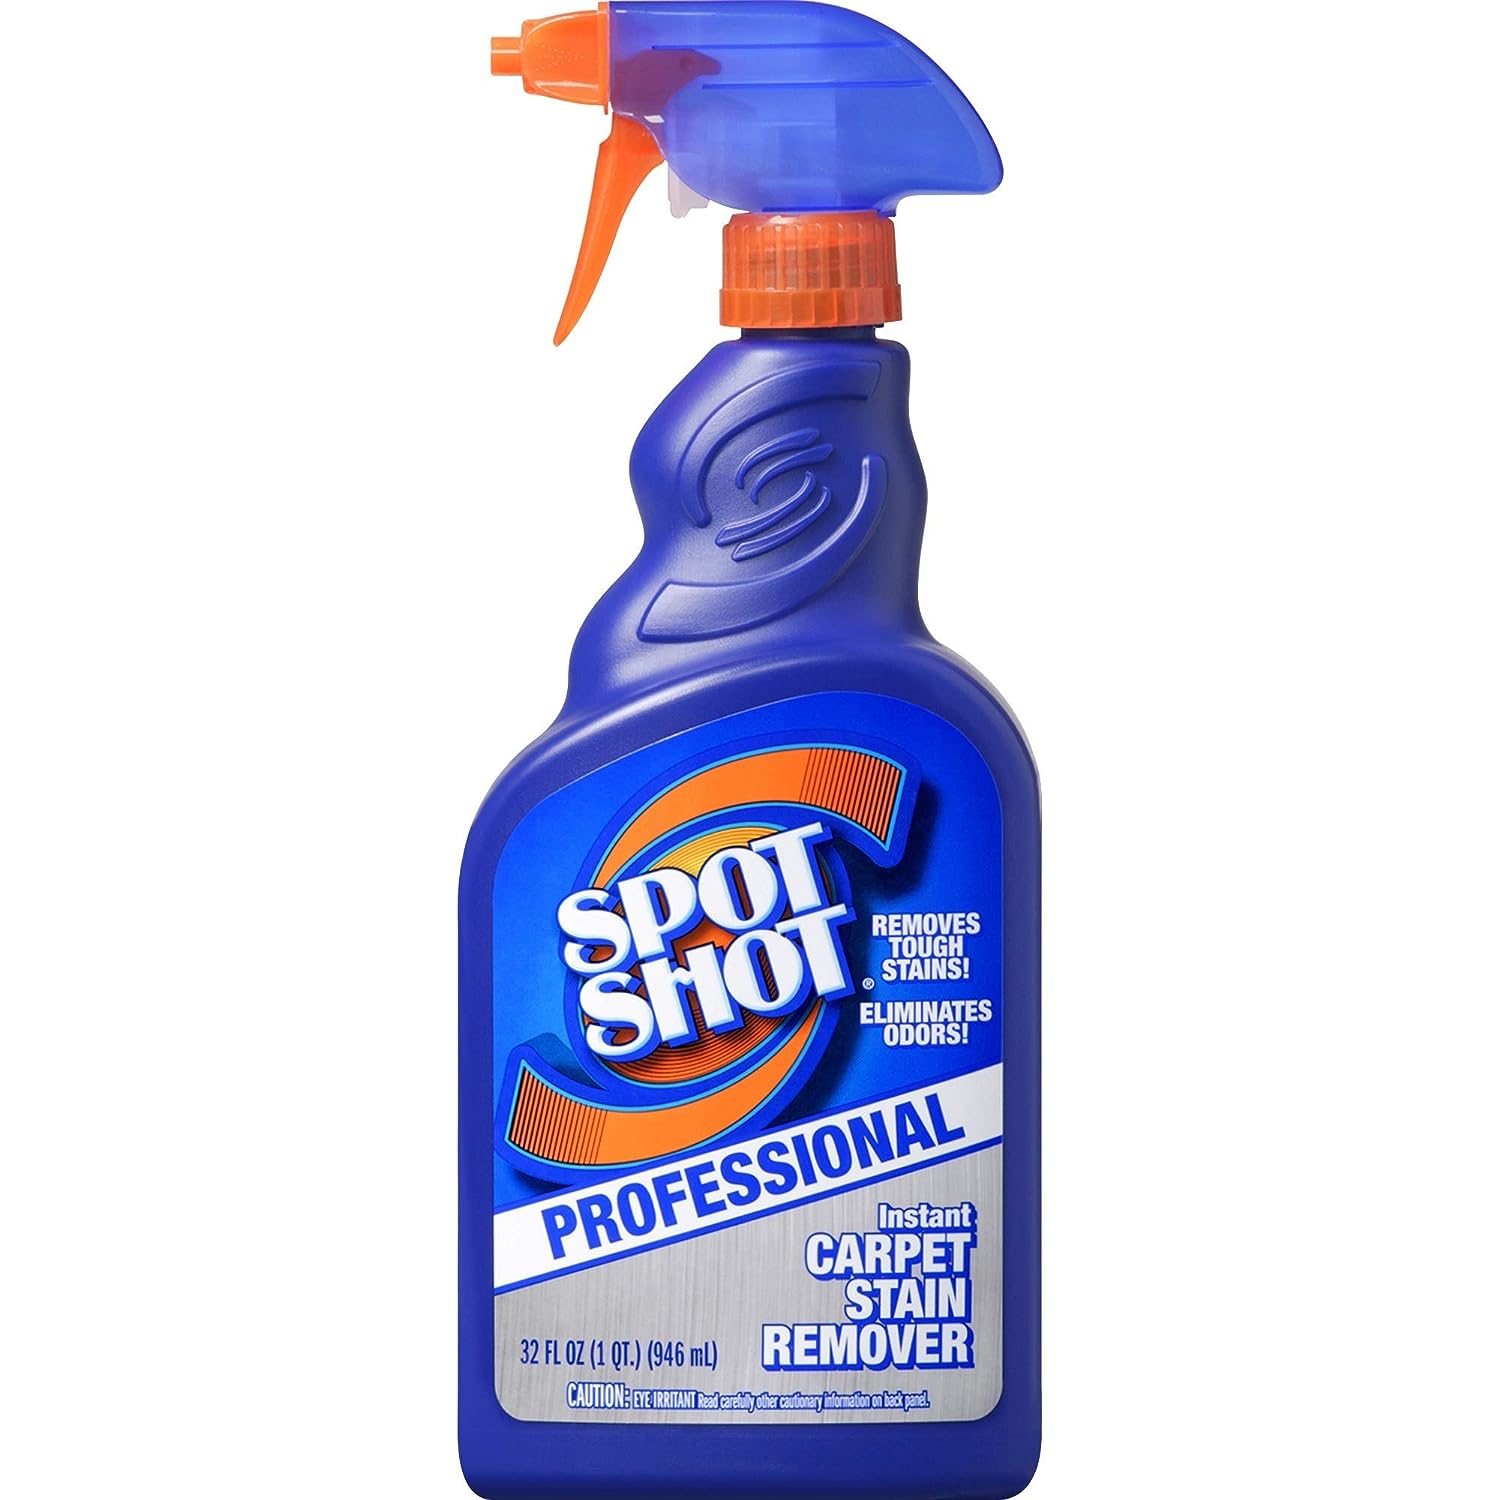 Spot Shot Professional Instant Carpet Stain Remover [...]